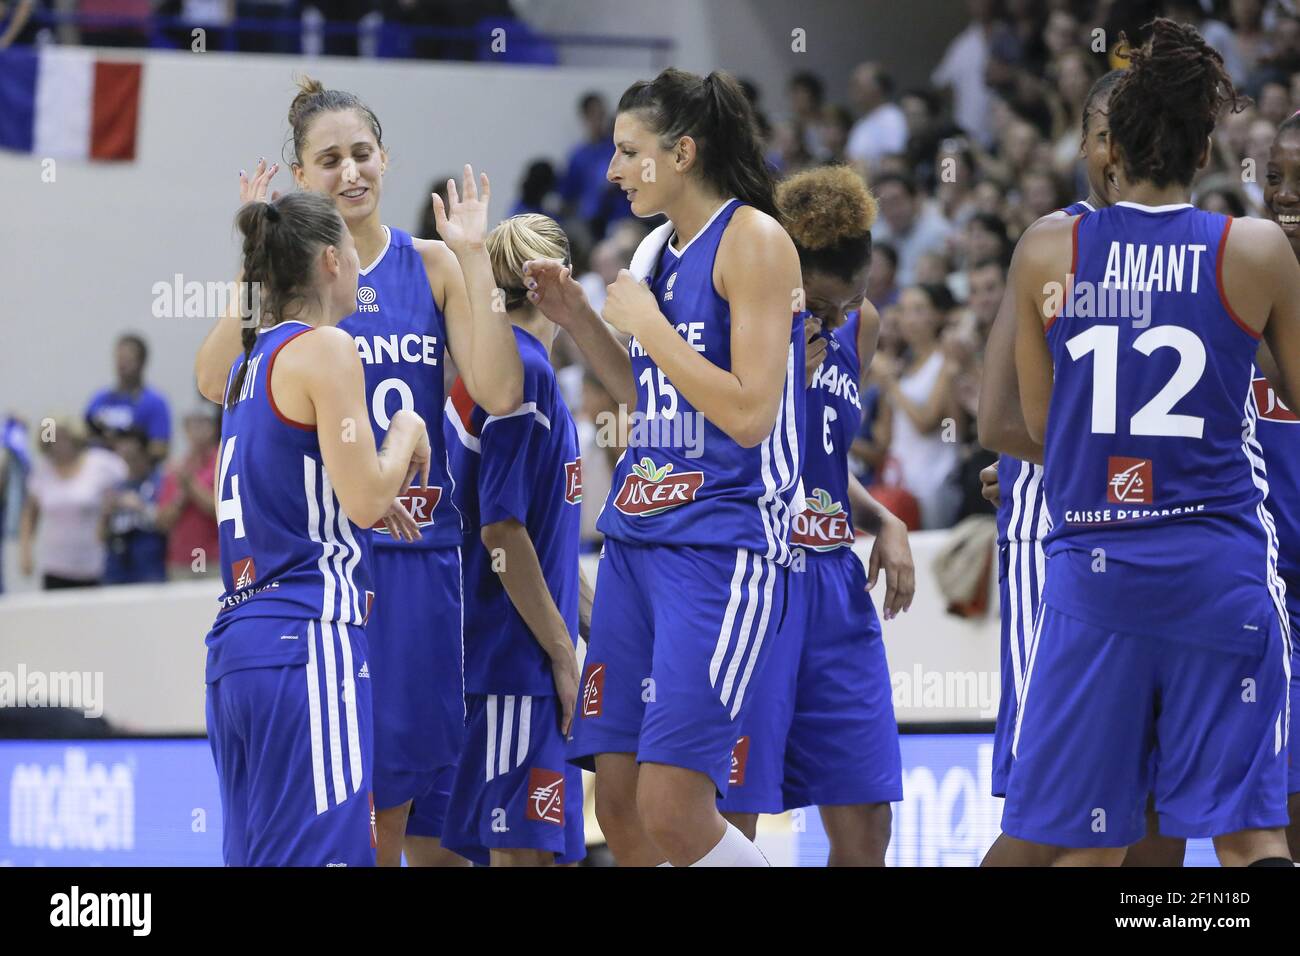 ANAEL LARDY, ANA MARIA CATA-CHITIGA and HELENA CIAK of France celebrate  after winning the 2014 Paris Tournament basketball match between France and  USA on September 21, 2014 at Pierre de Coubertin stadium